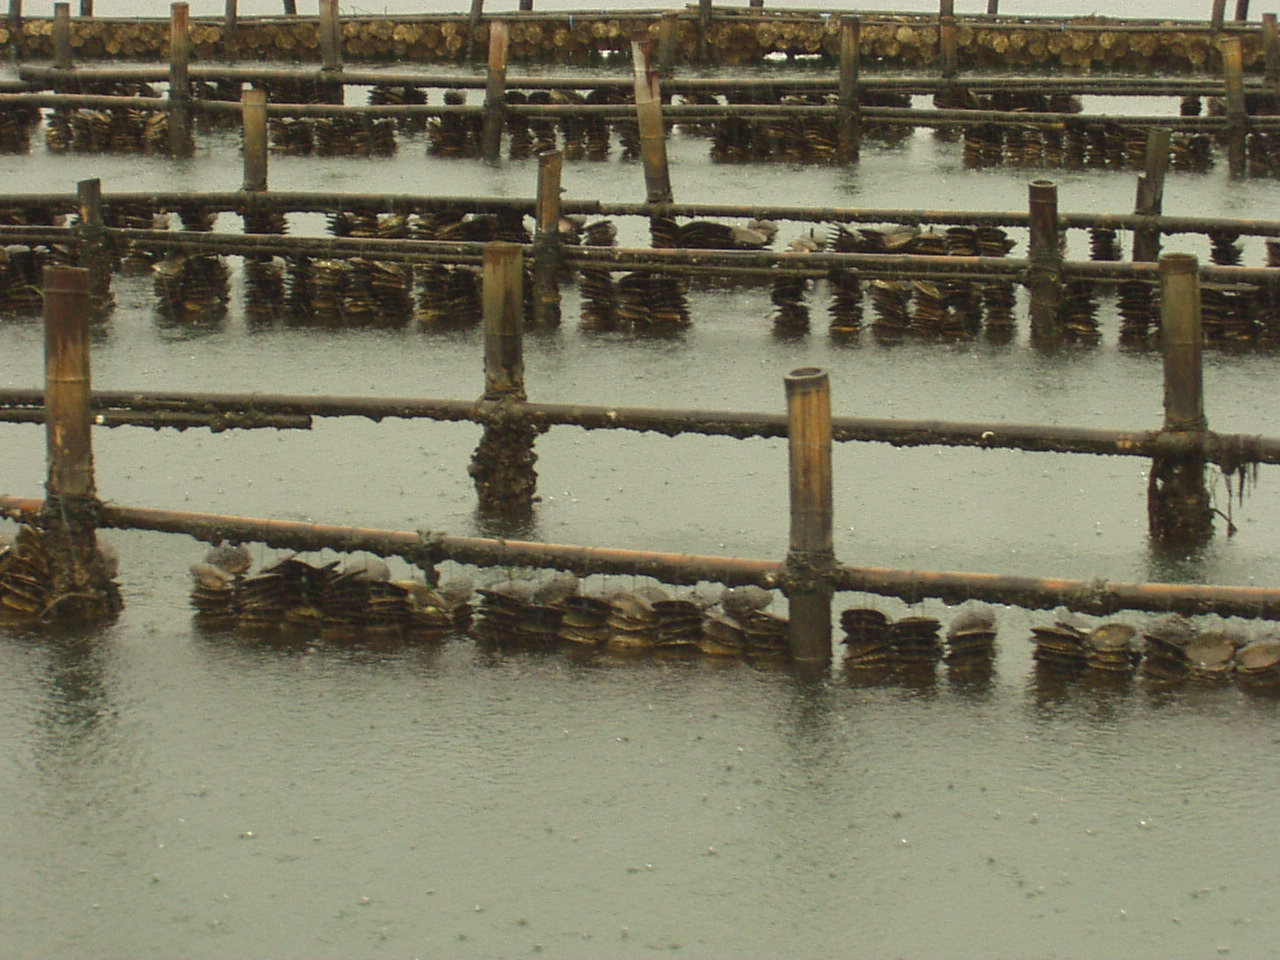 View of Japanese oyster culture system